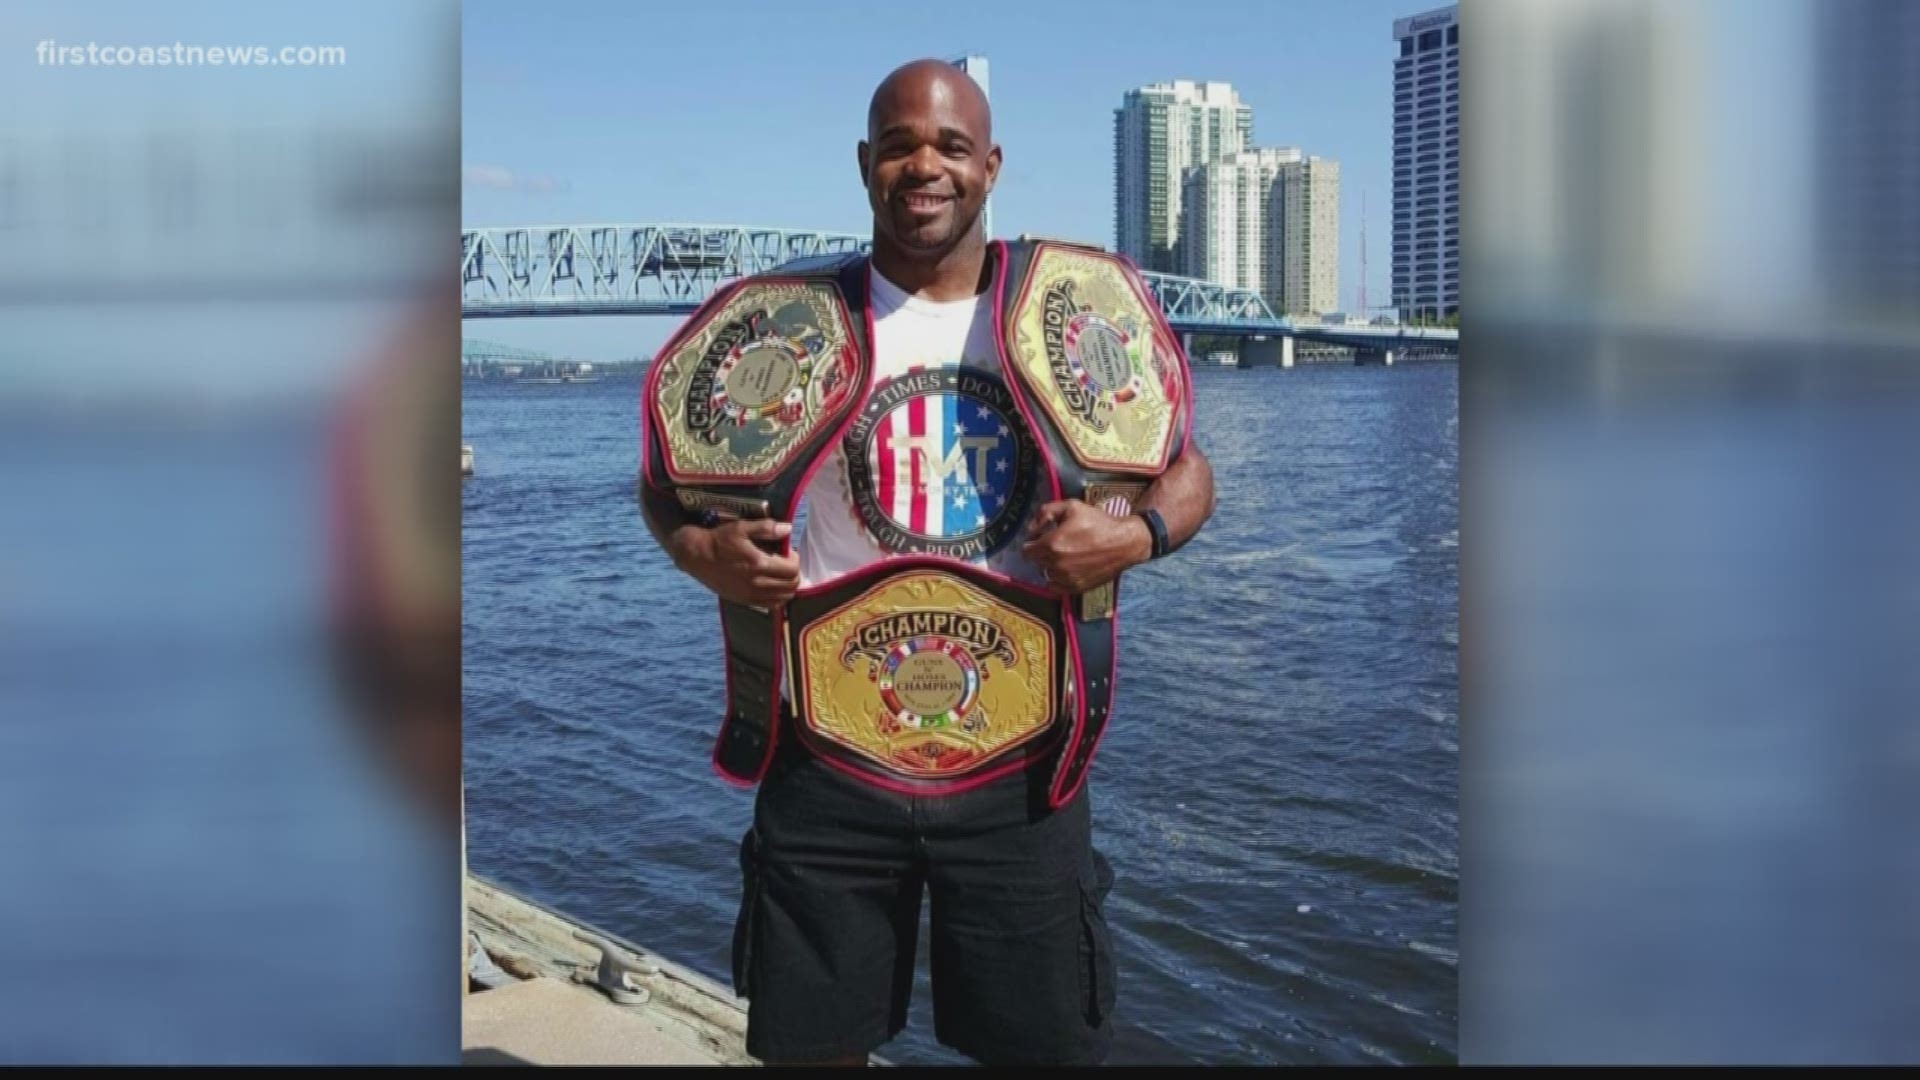 Jerry Haddock, an Orlando Police Officer, was in Jacksonville training for the Guns and Hoses event when he collapsed. He is in critical condition.